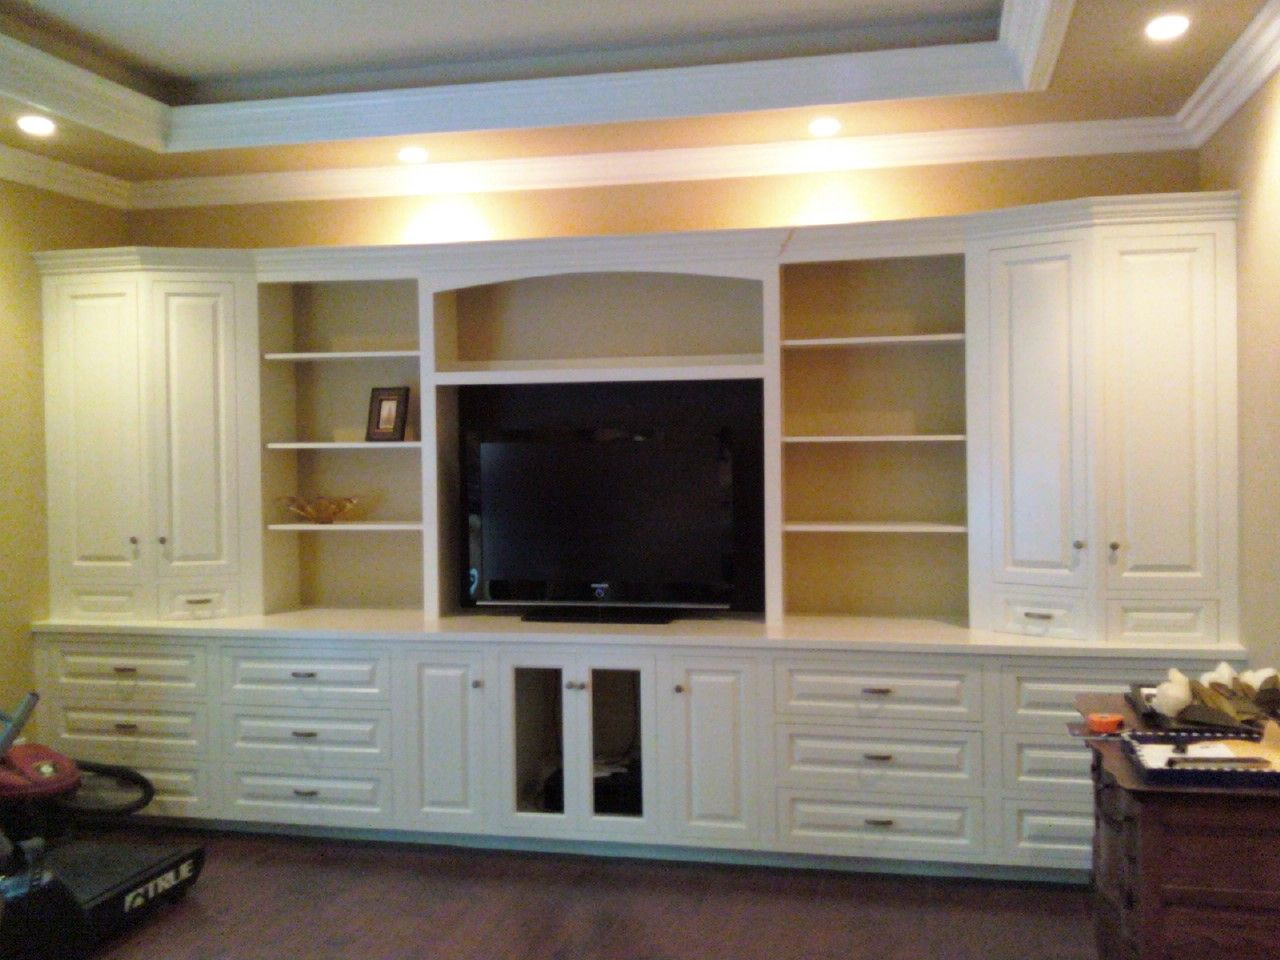 Bedroom Wall Storage Cabinets
 Custom Cabinet Plans Built In Wall Unit Designs Houses